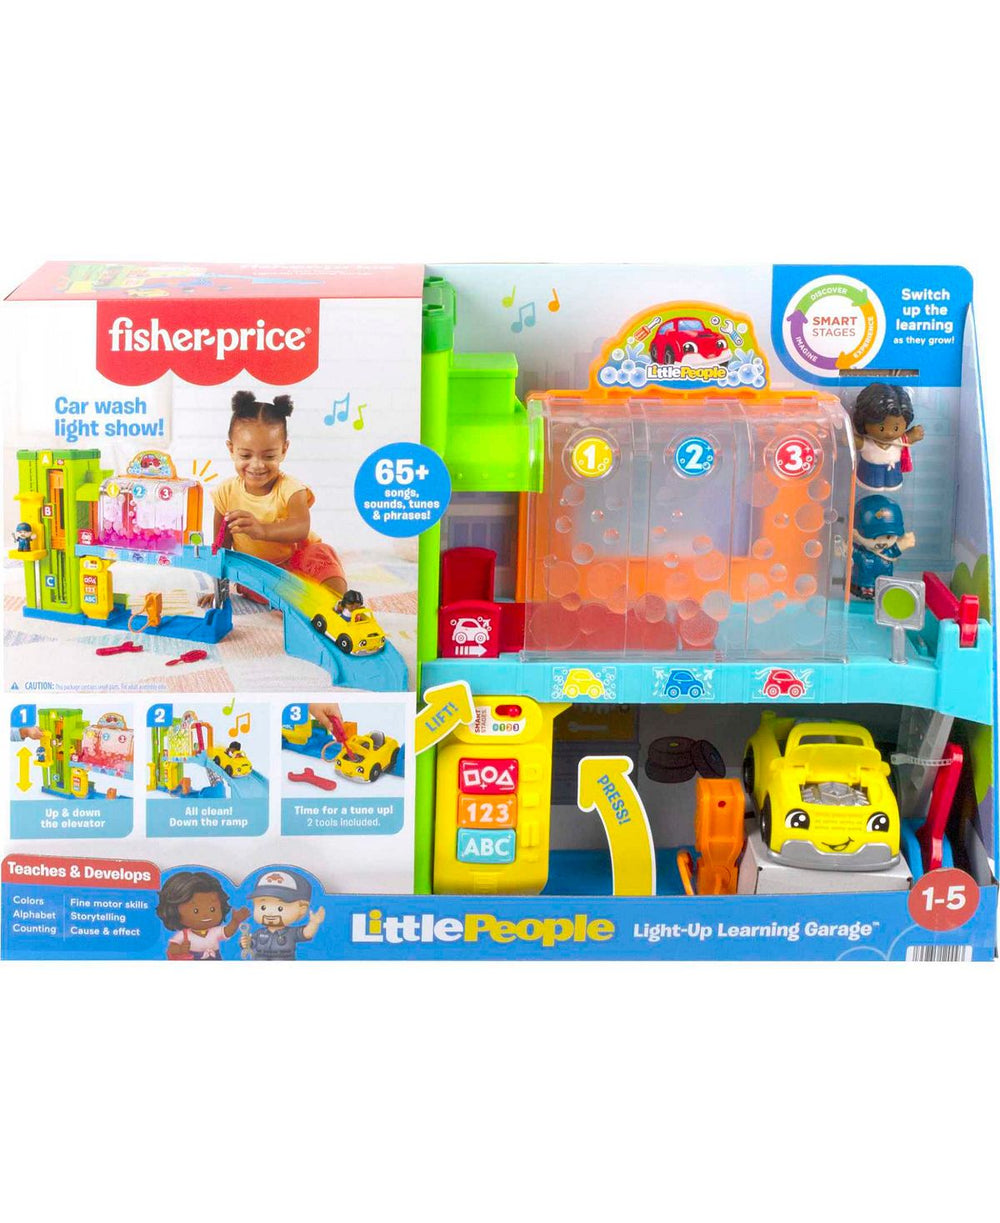 Fisher-Price Little People Light-Up Learning Garage Playset with Toy Car